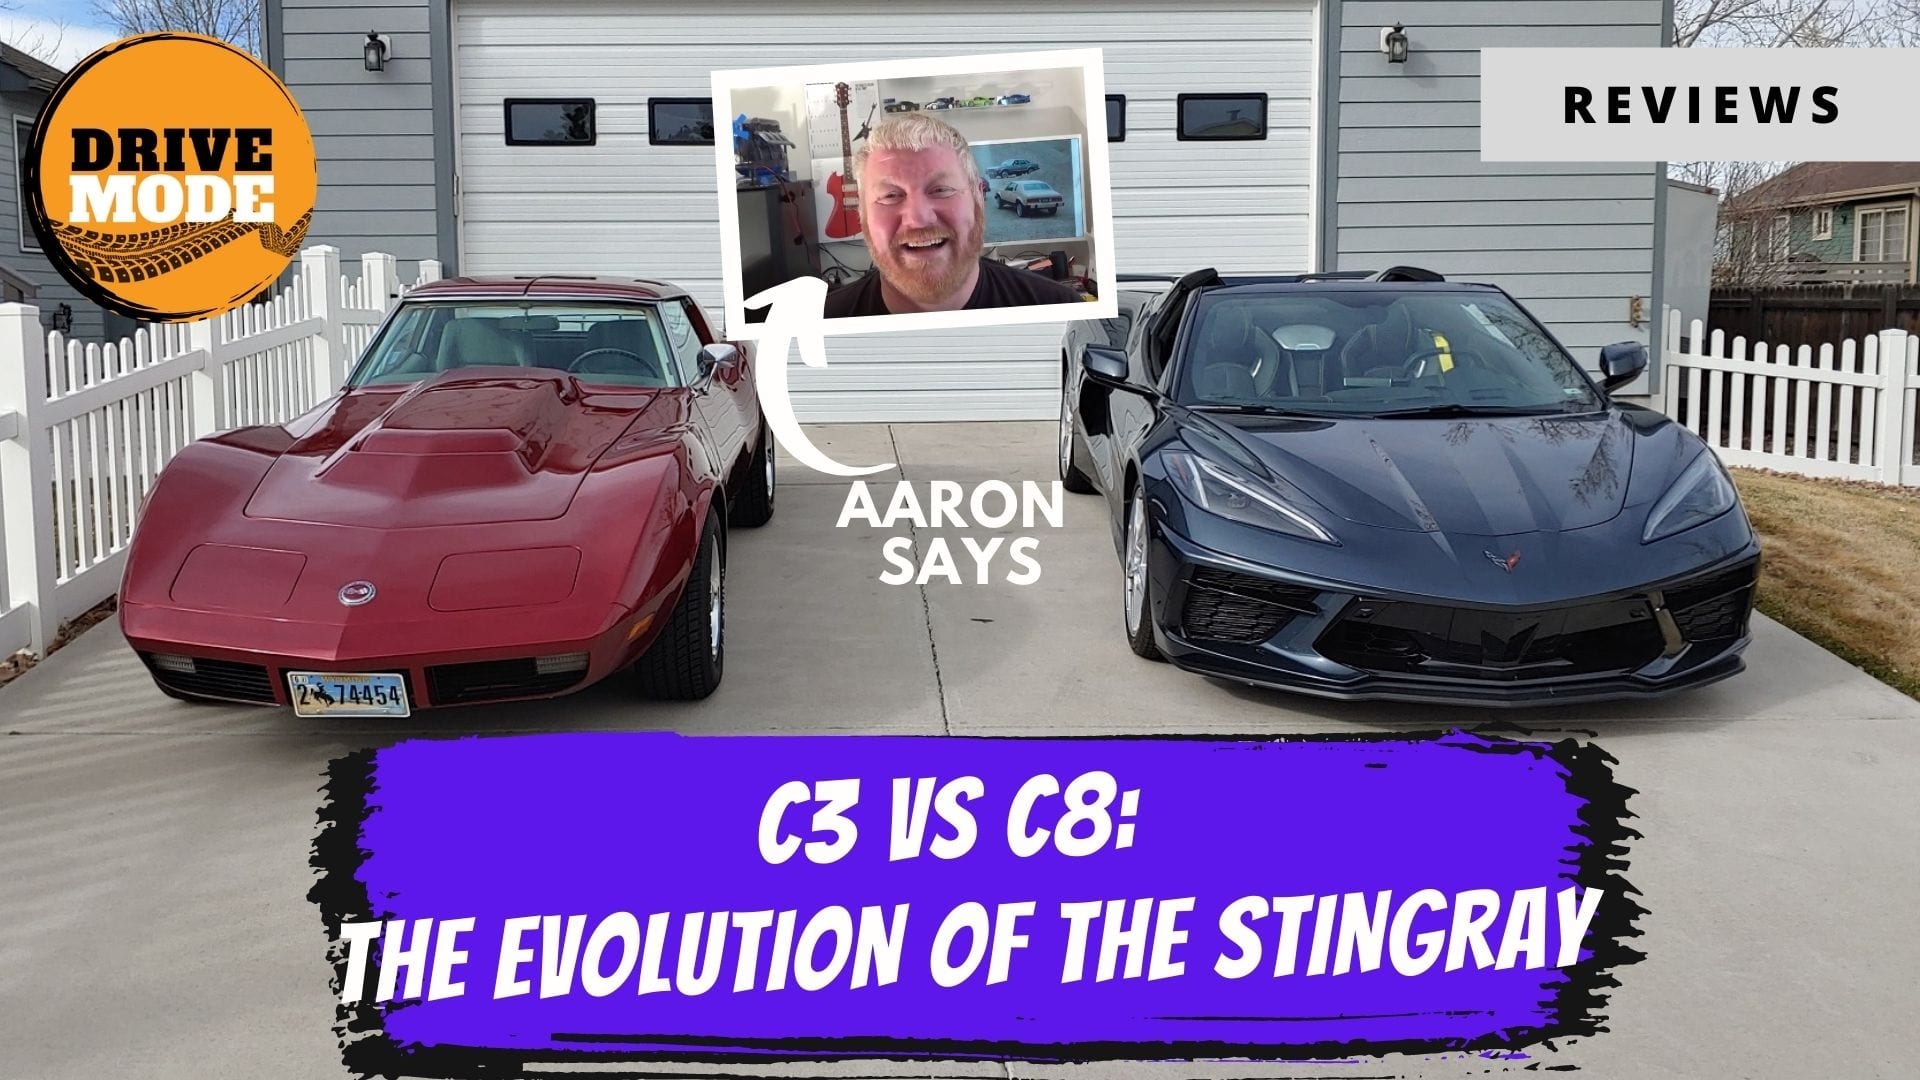 2020 Chevrolet Corvette Review: How Does It Stack Up To a 1974 454 Stingray?